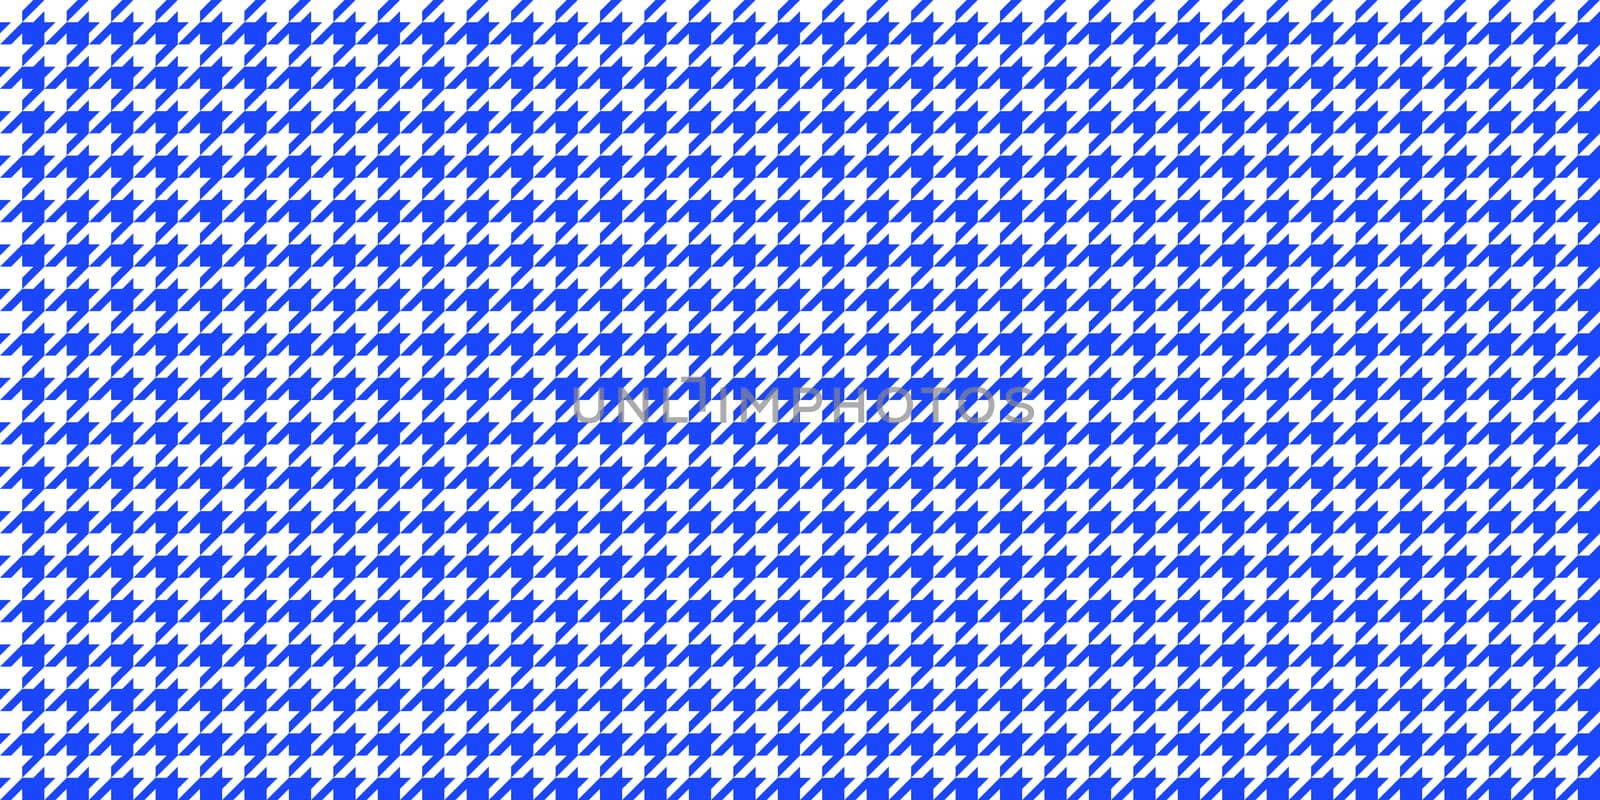 Blue Seamless Houndstooth Pattern Background. Traditional Arab Texture. Fabric Textile Material.